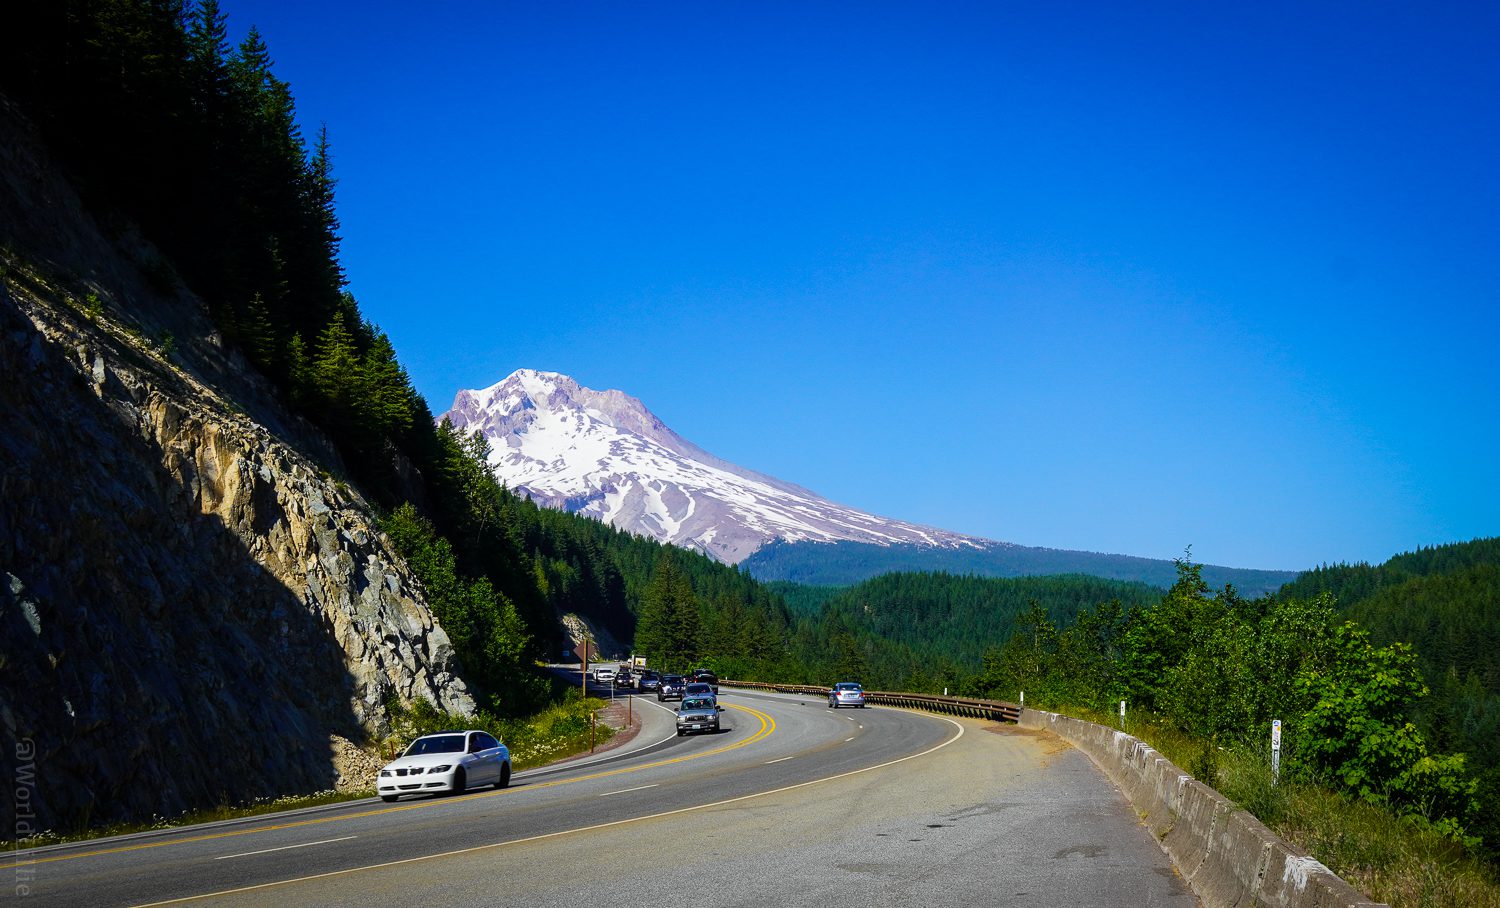 Mount Hood, seen from Route 26.